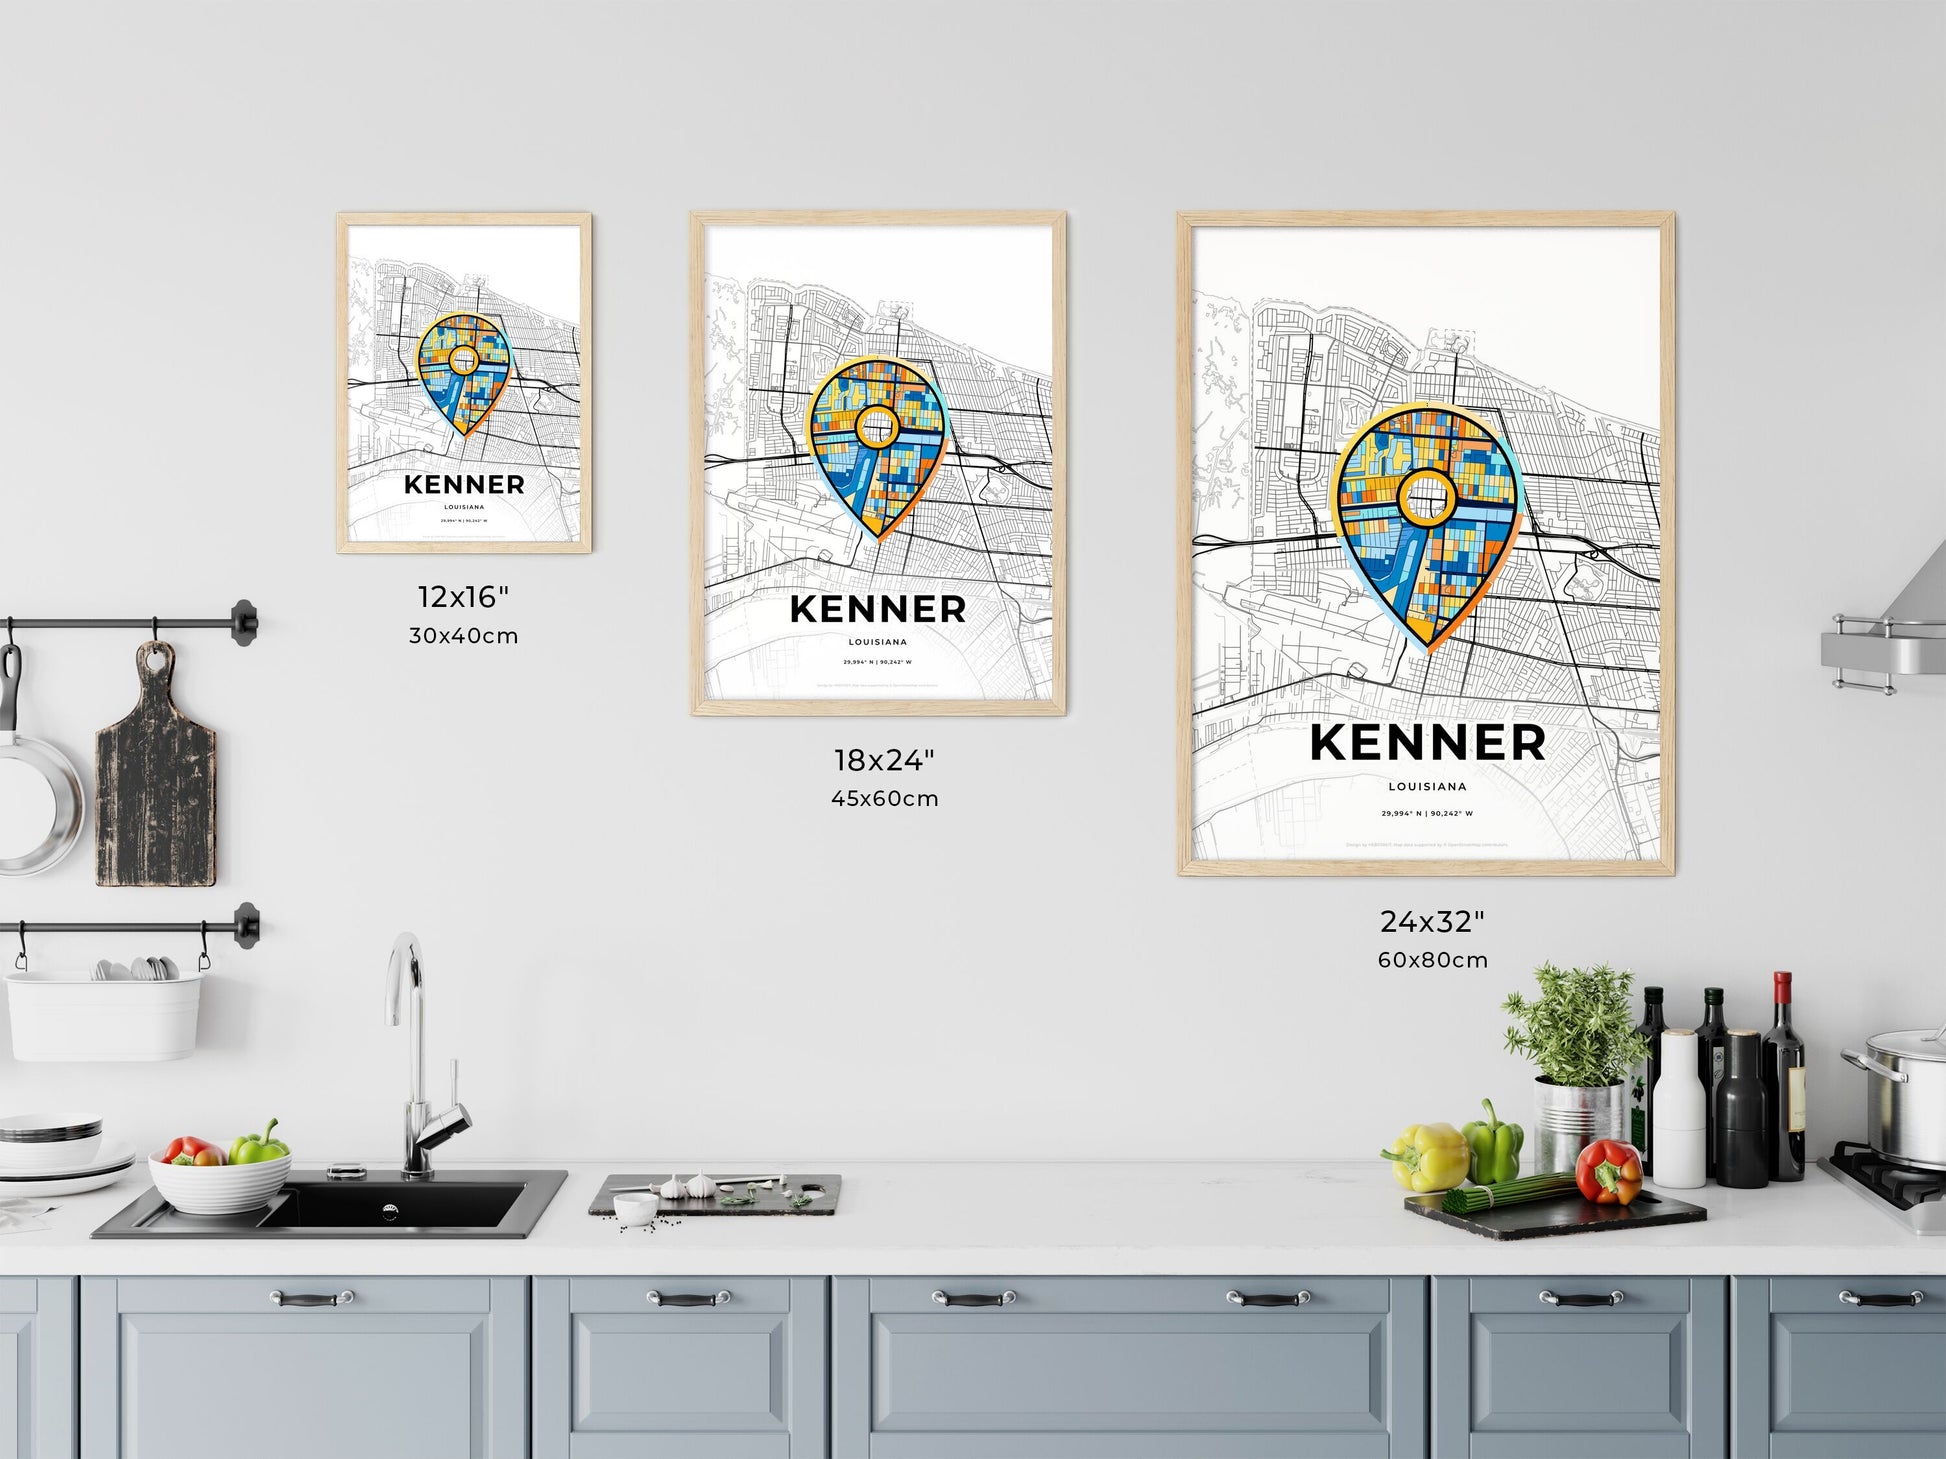 KENNER LOUISIANA minimal art map with a colorful icon. Where it all began, Couple map gift.